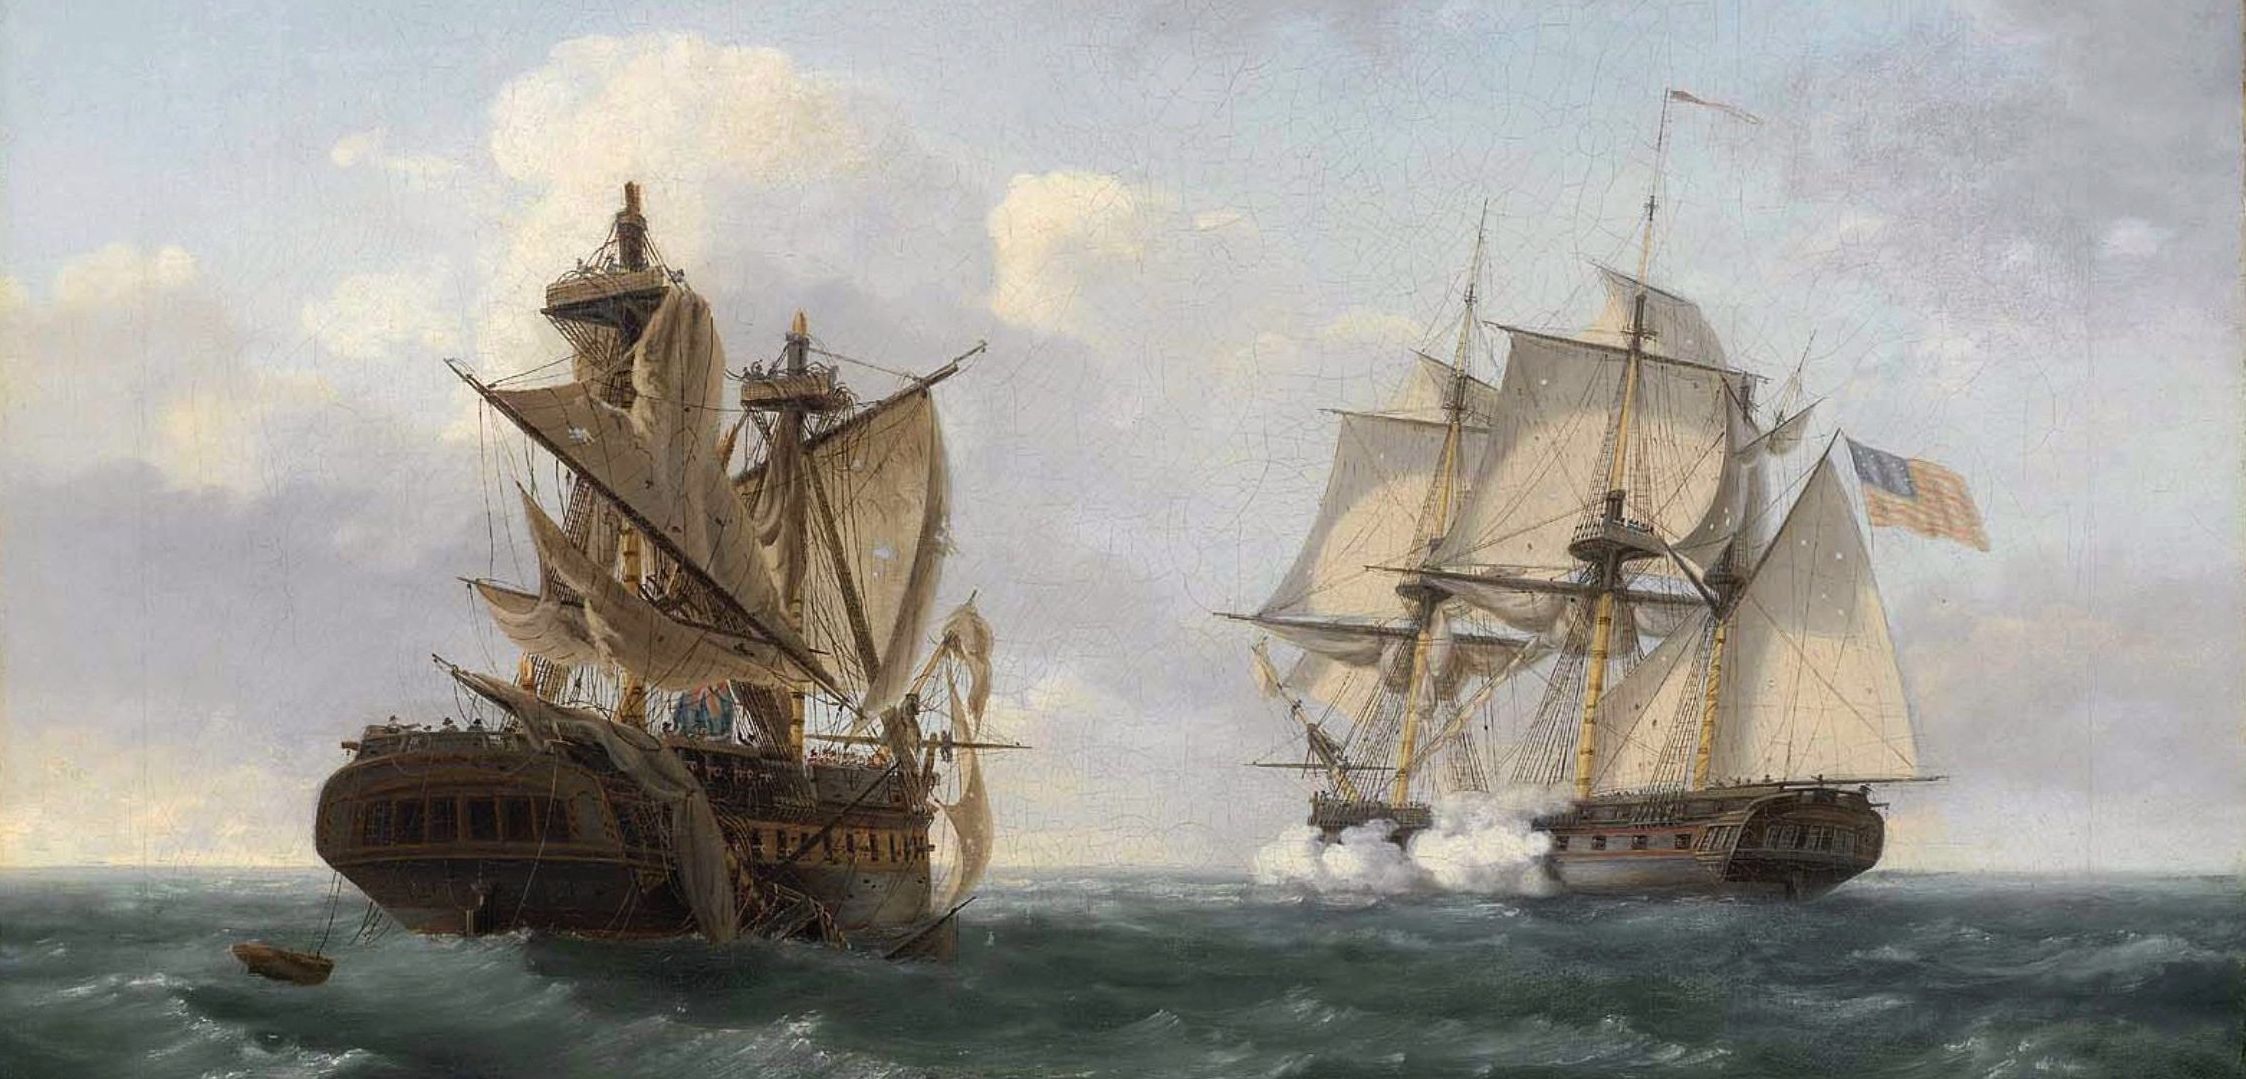 As captain of the United States, Decatur defeated the British frigate Macedonian.